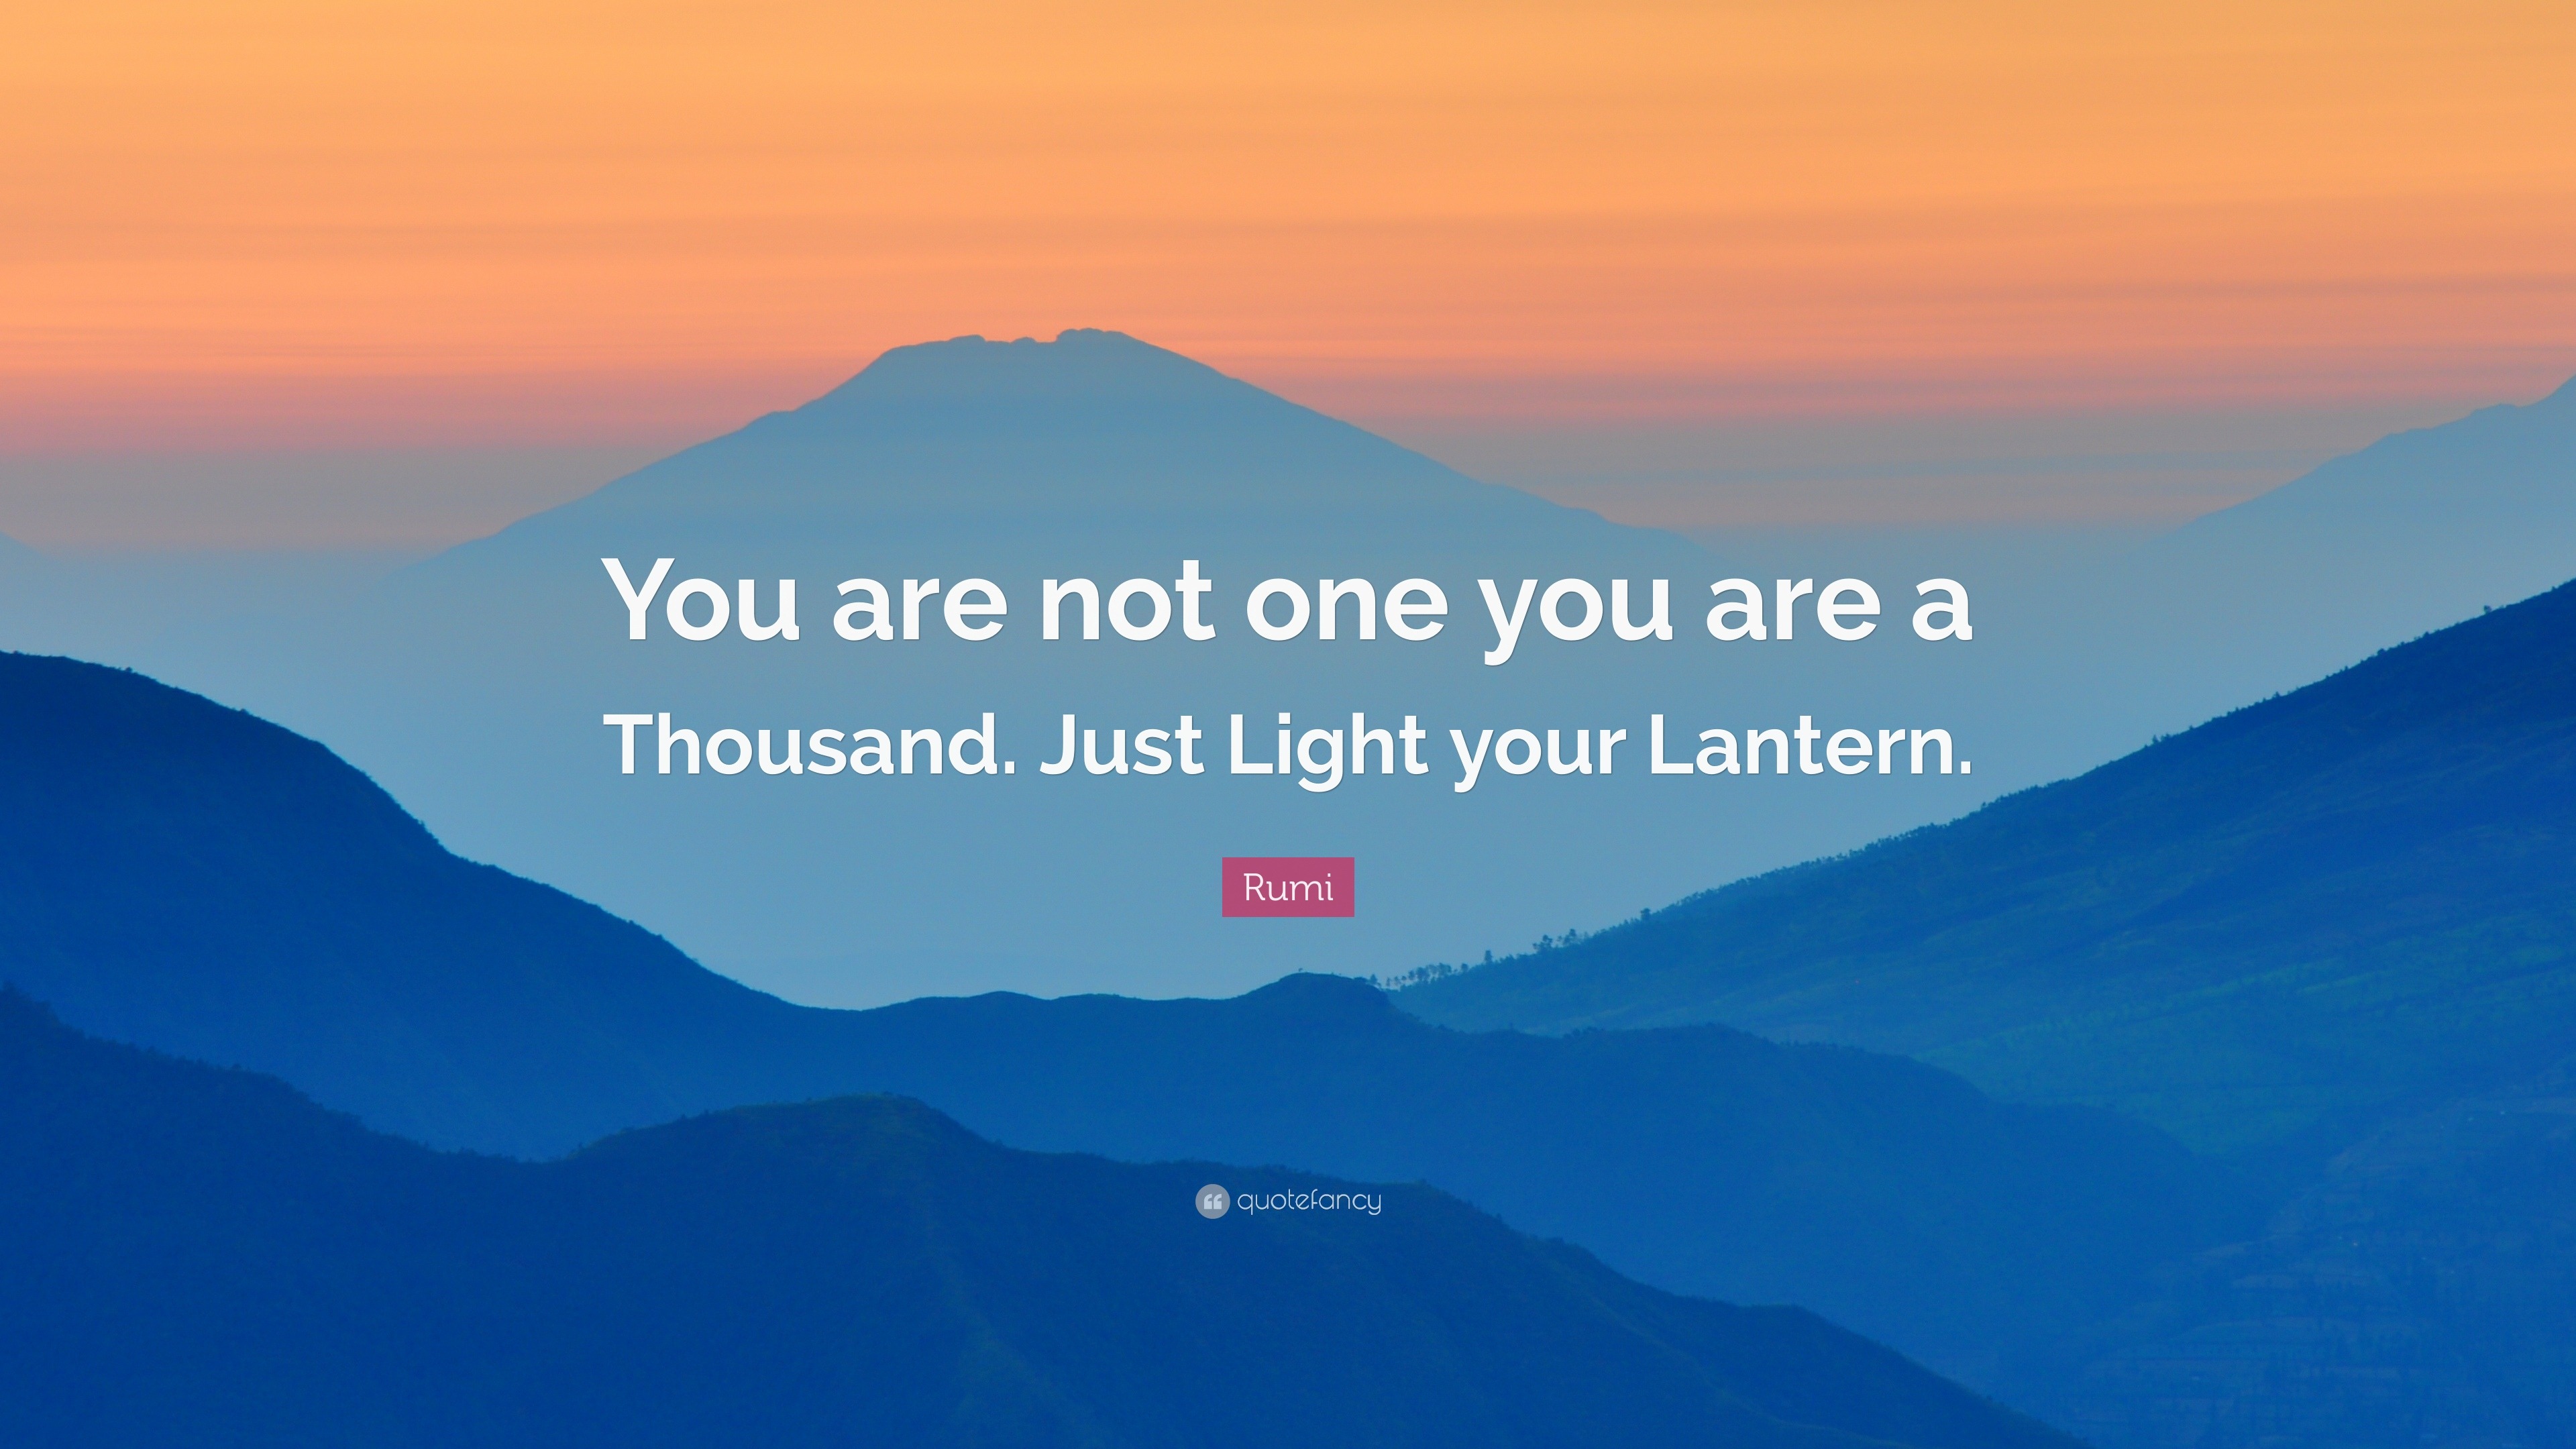 Quote: “You are you are Thousand. Just Light your Lantern.”